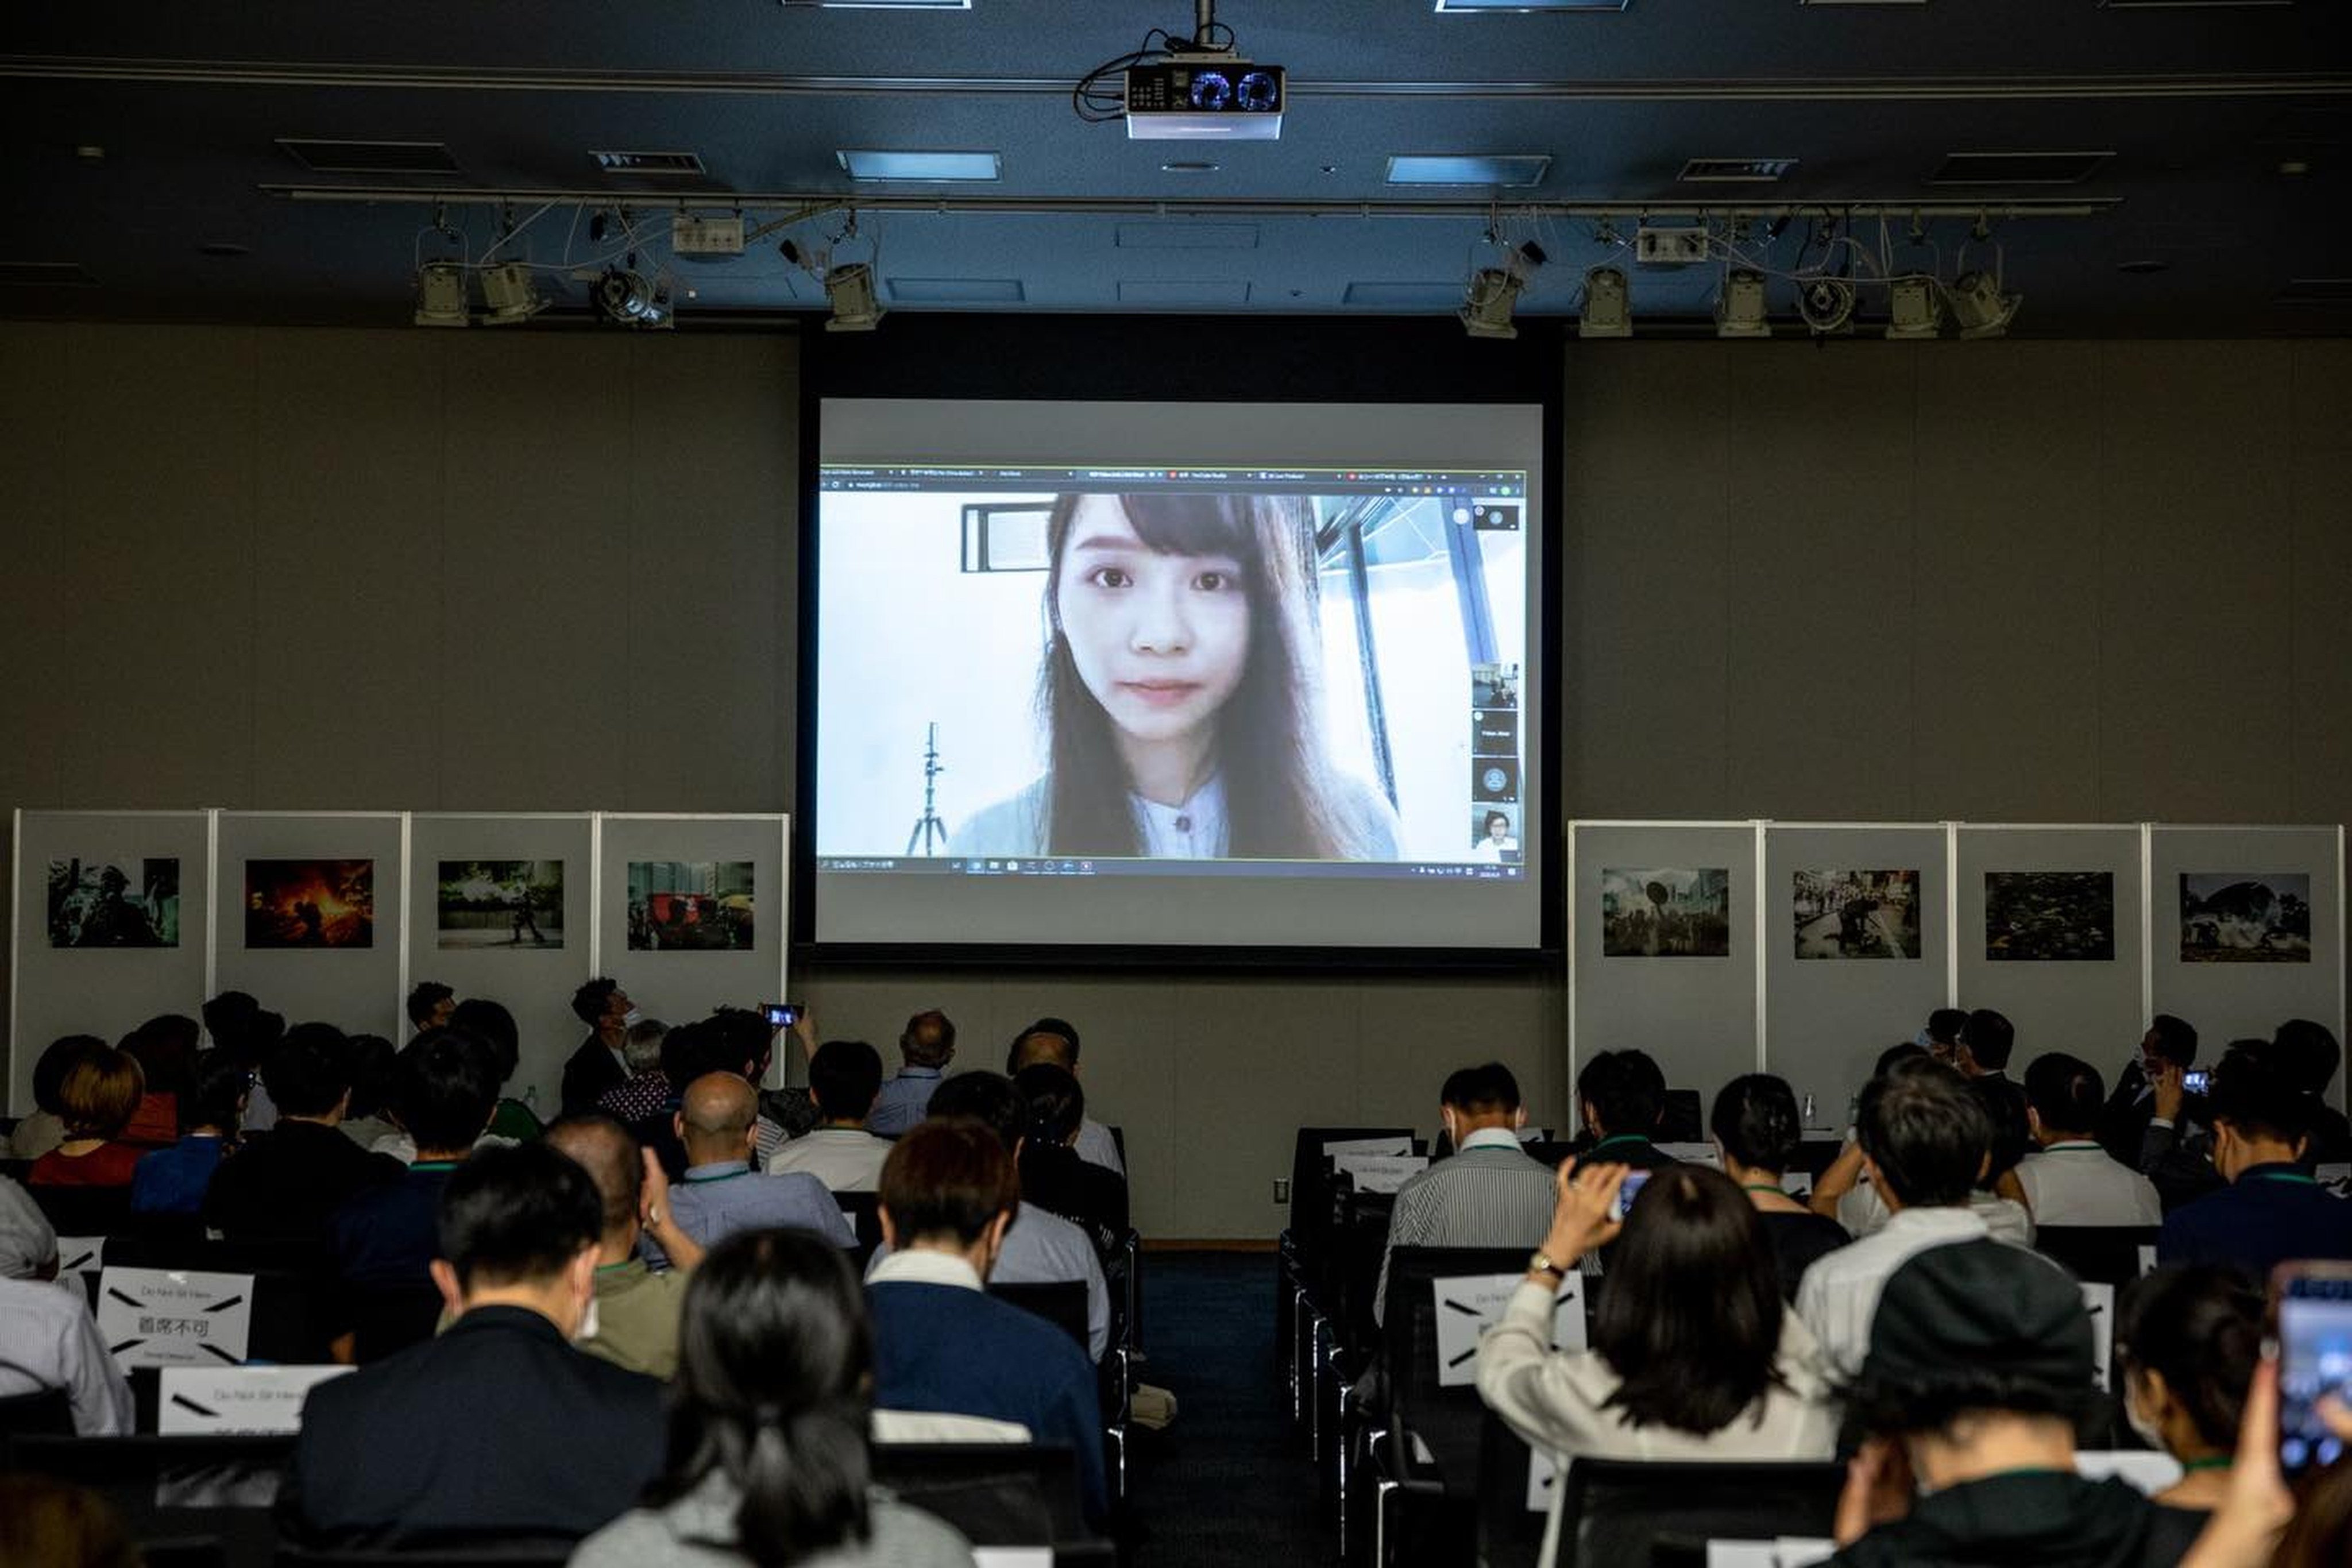 Opposition activist Agnes Chow addresses a Japanese audience via a video link in mid-2020. Photo: Handout